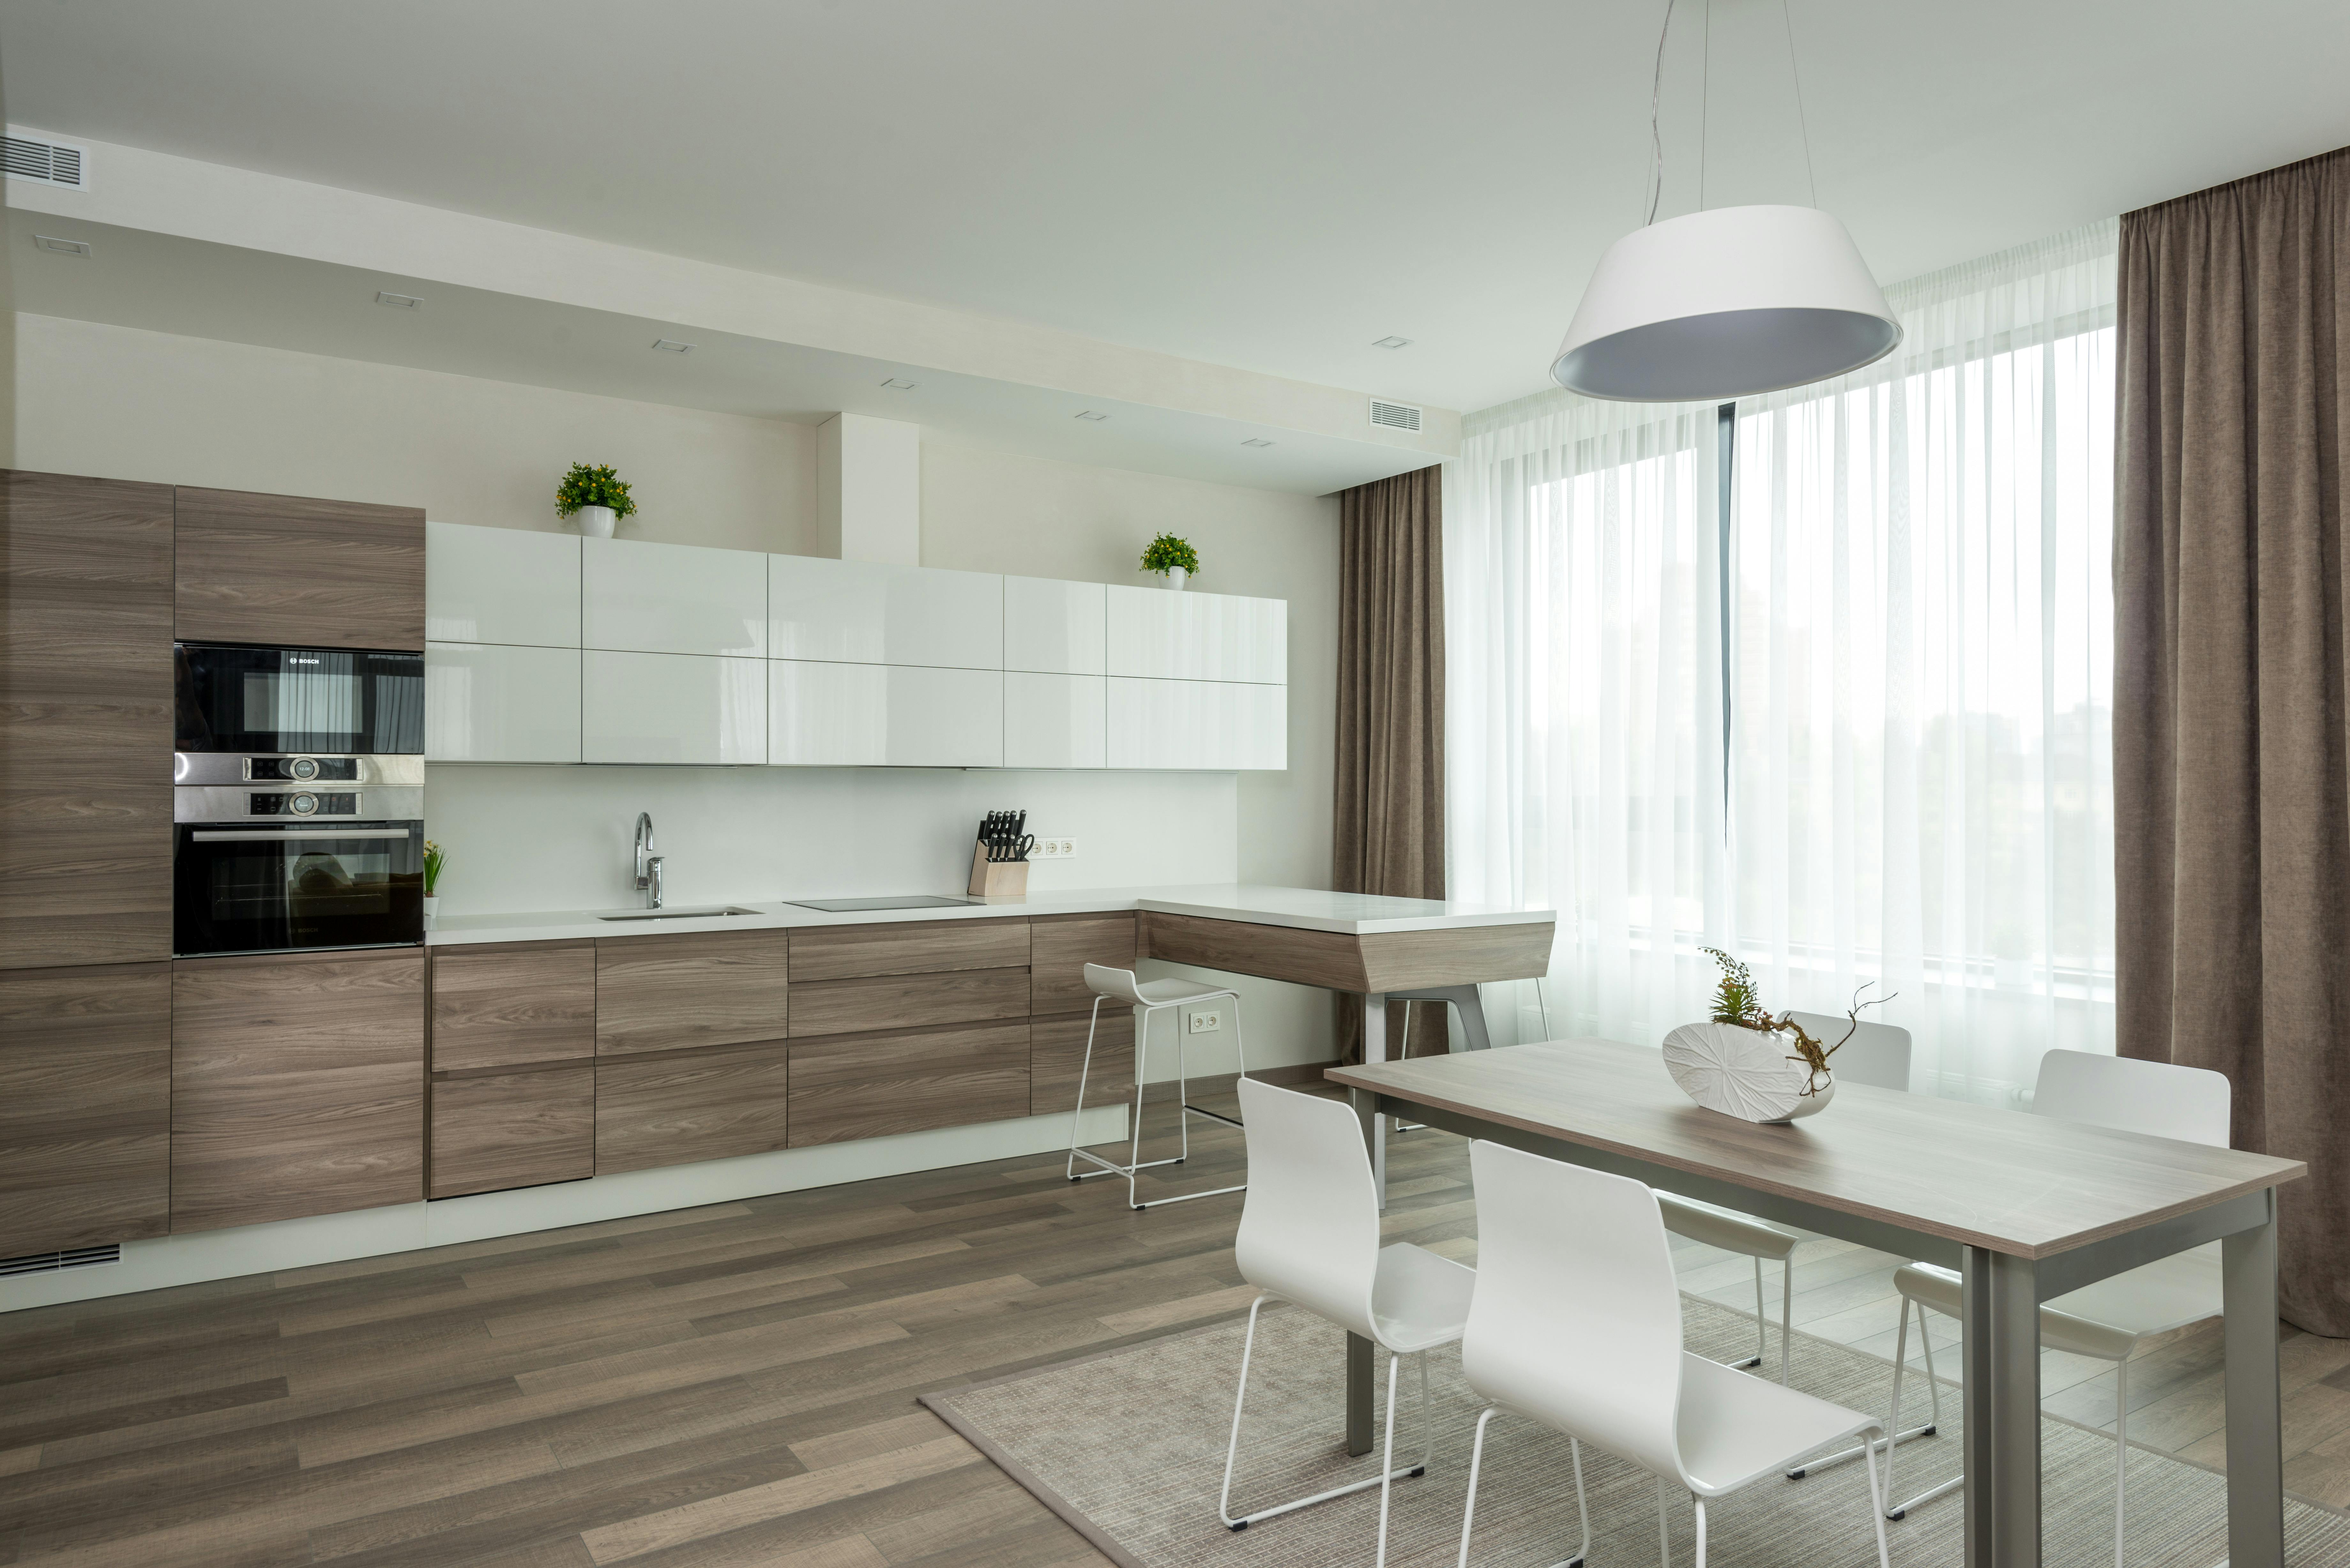 spacious kitchen with dining zone and minimalist furniture